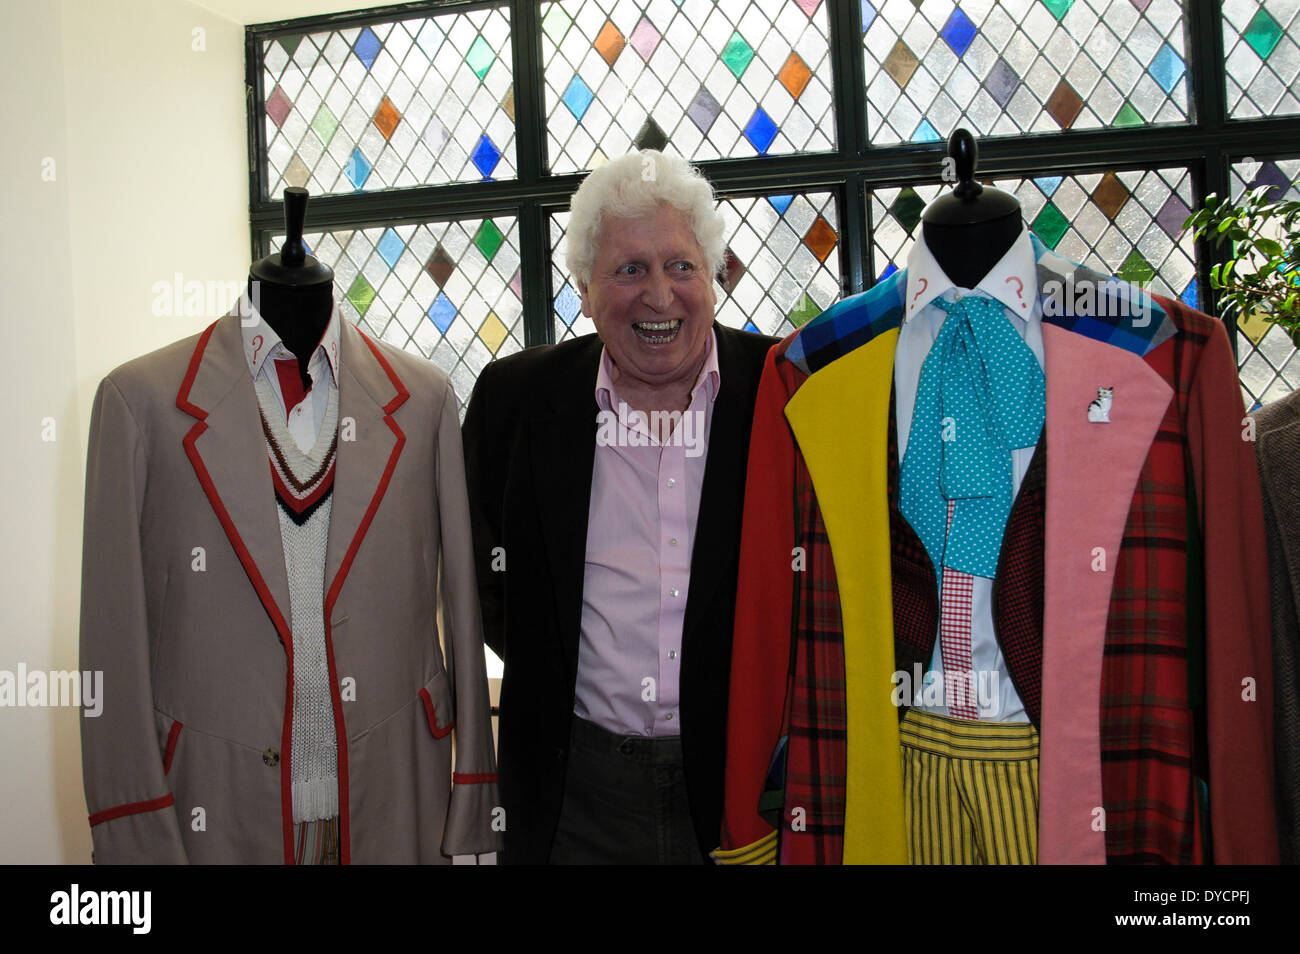 Tom Baker attends the launch for The Horror Channel season of Doctor Who on 14/04/2014 at The Ivy Club, London. The Horror Channel will broadcast 30 stories from the classic series which ran from 1963 to 1989  featuring the first seven Doctors, starting with Hartnell and concluding with Sylvester McCoy. Persons pictured: Tom Baker.  Picture by Julie Edwards Stock Photo